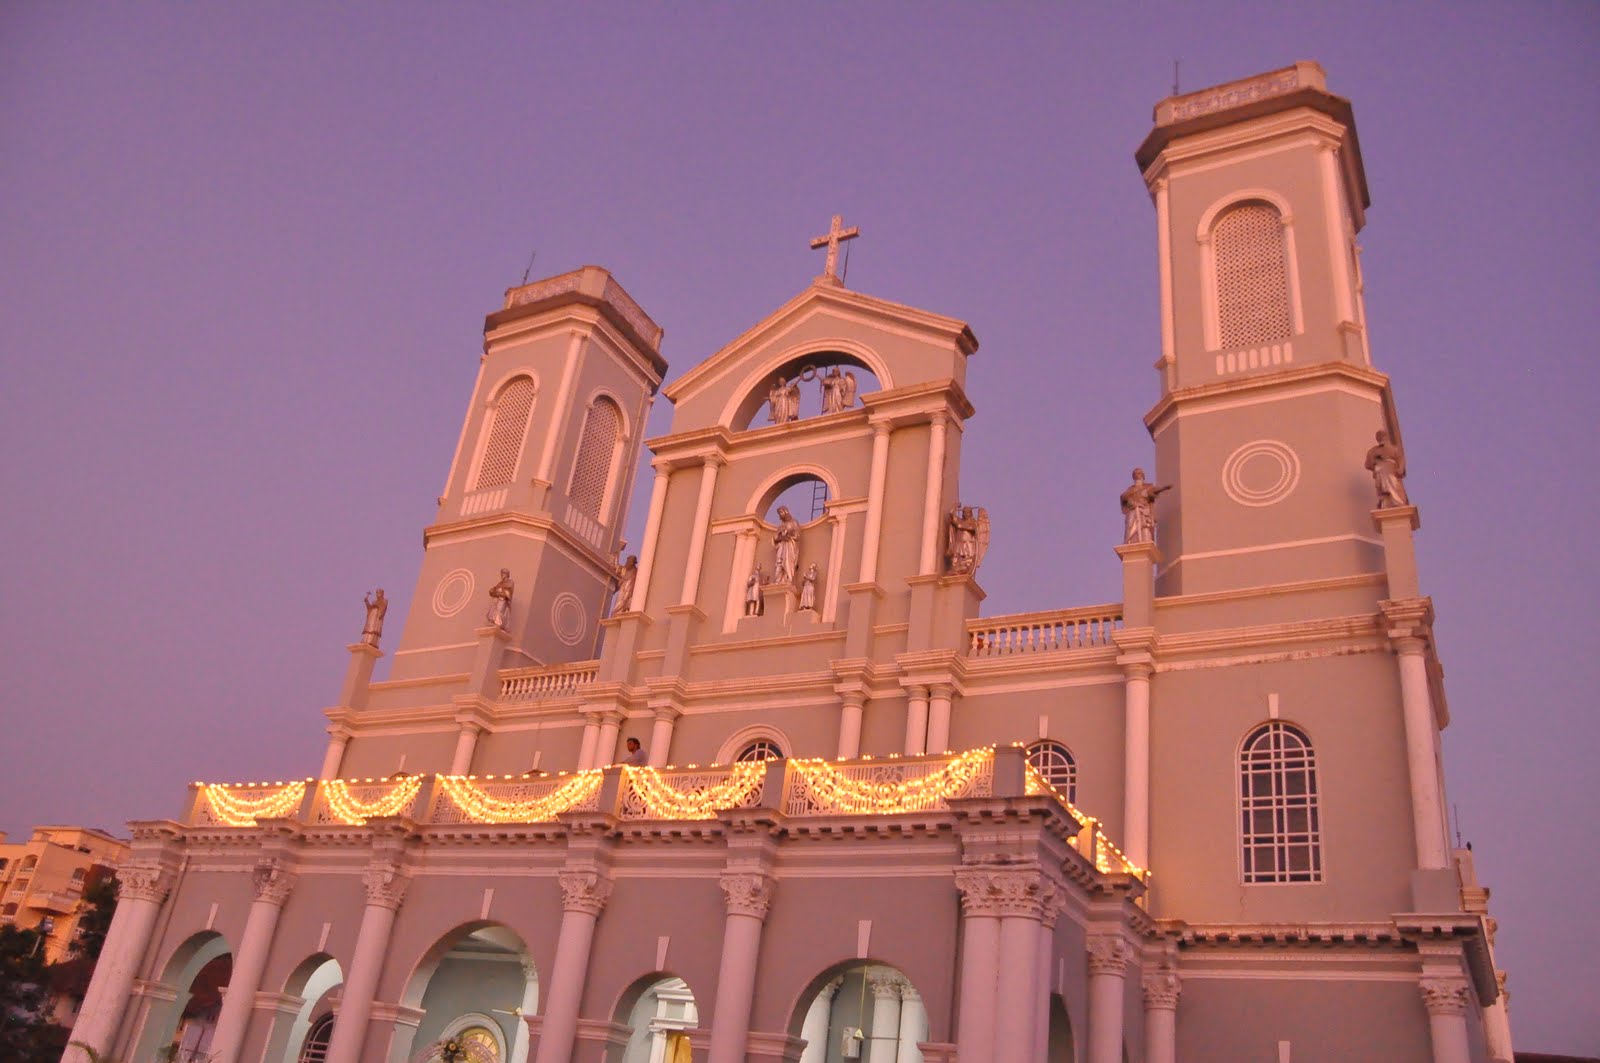 the church is lighted at night with bright lights